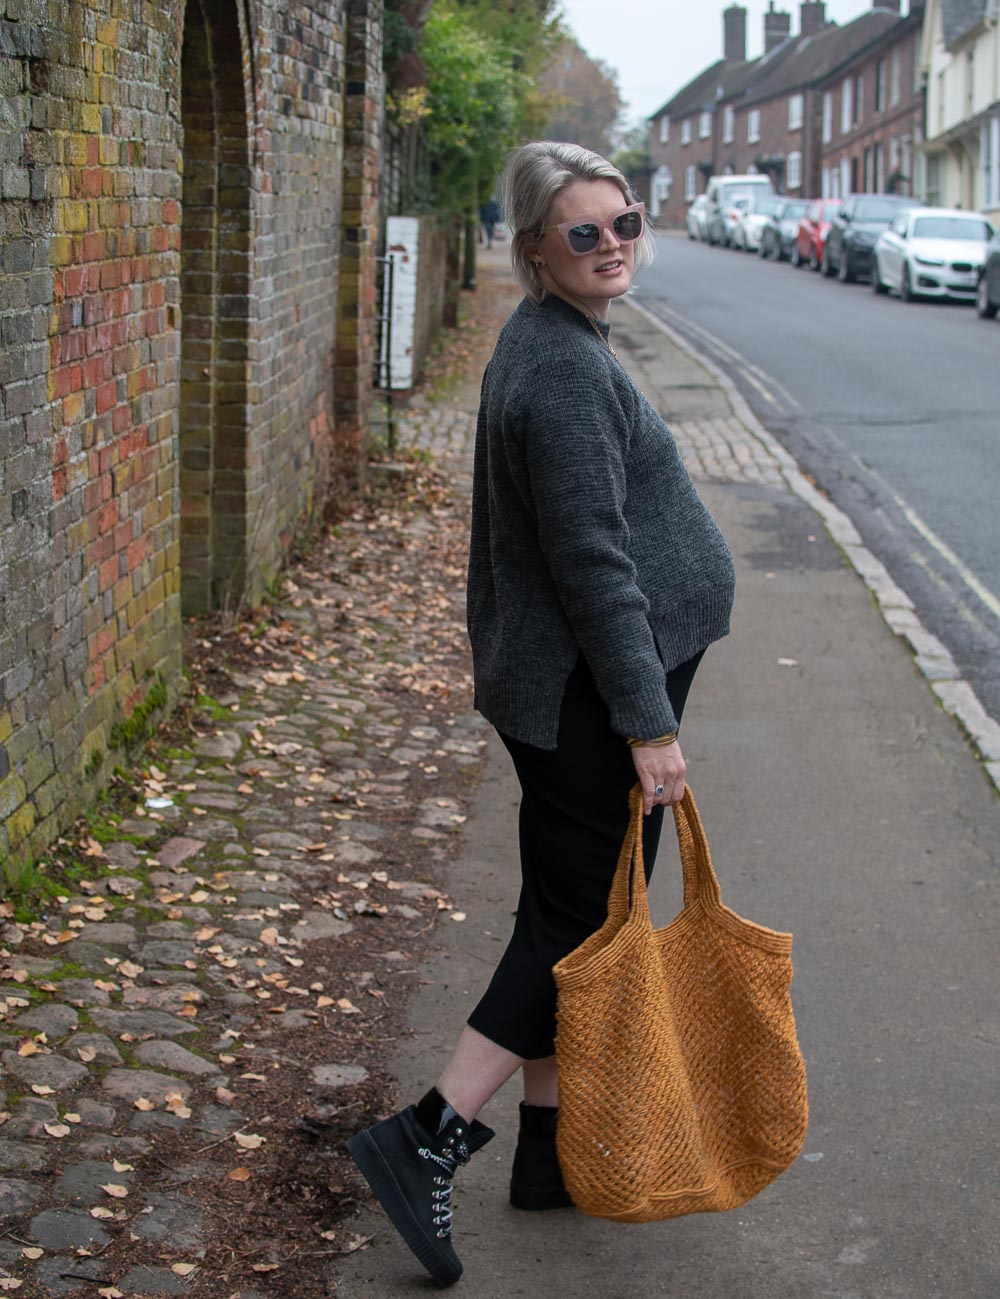 Karen Maurice of n4mummy wears a black midi length dress and waffle knit grey jumper from Boob at 36 weeks pregnant. With lace up boots from Shoe the bear